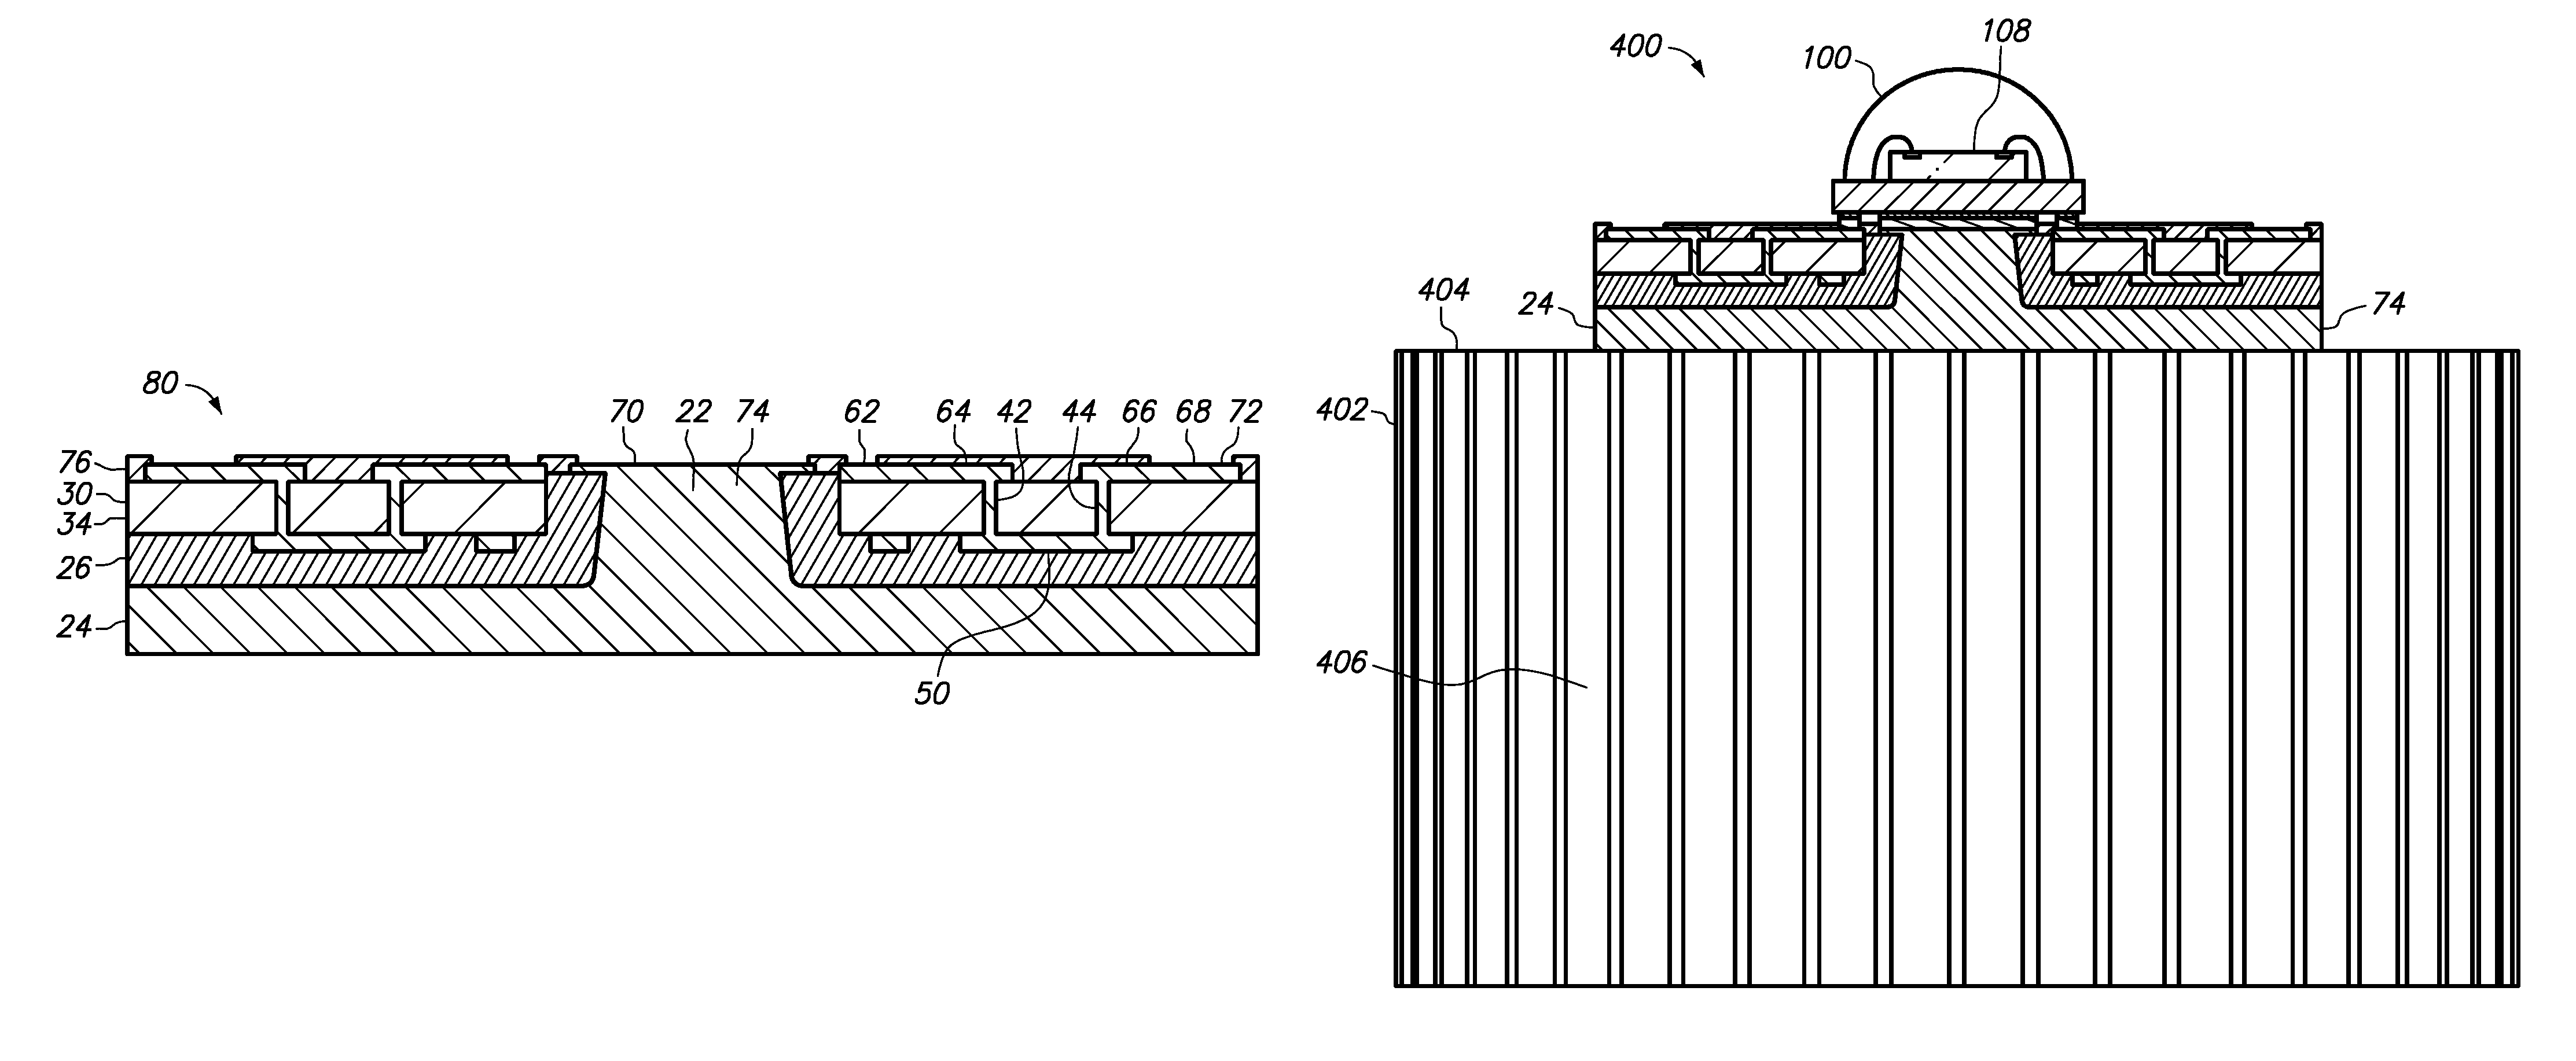 Method of making a semiconductor chip assembly with a post/base heat spreader and horizontal signal routing